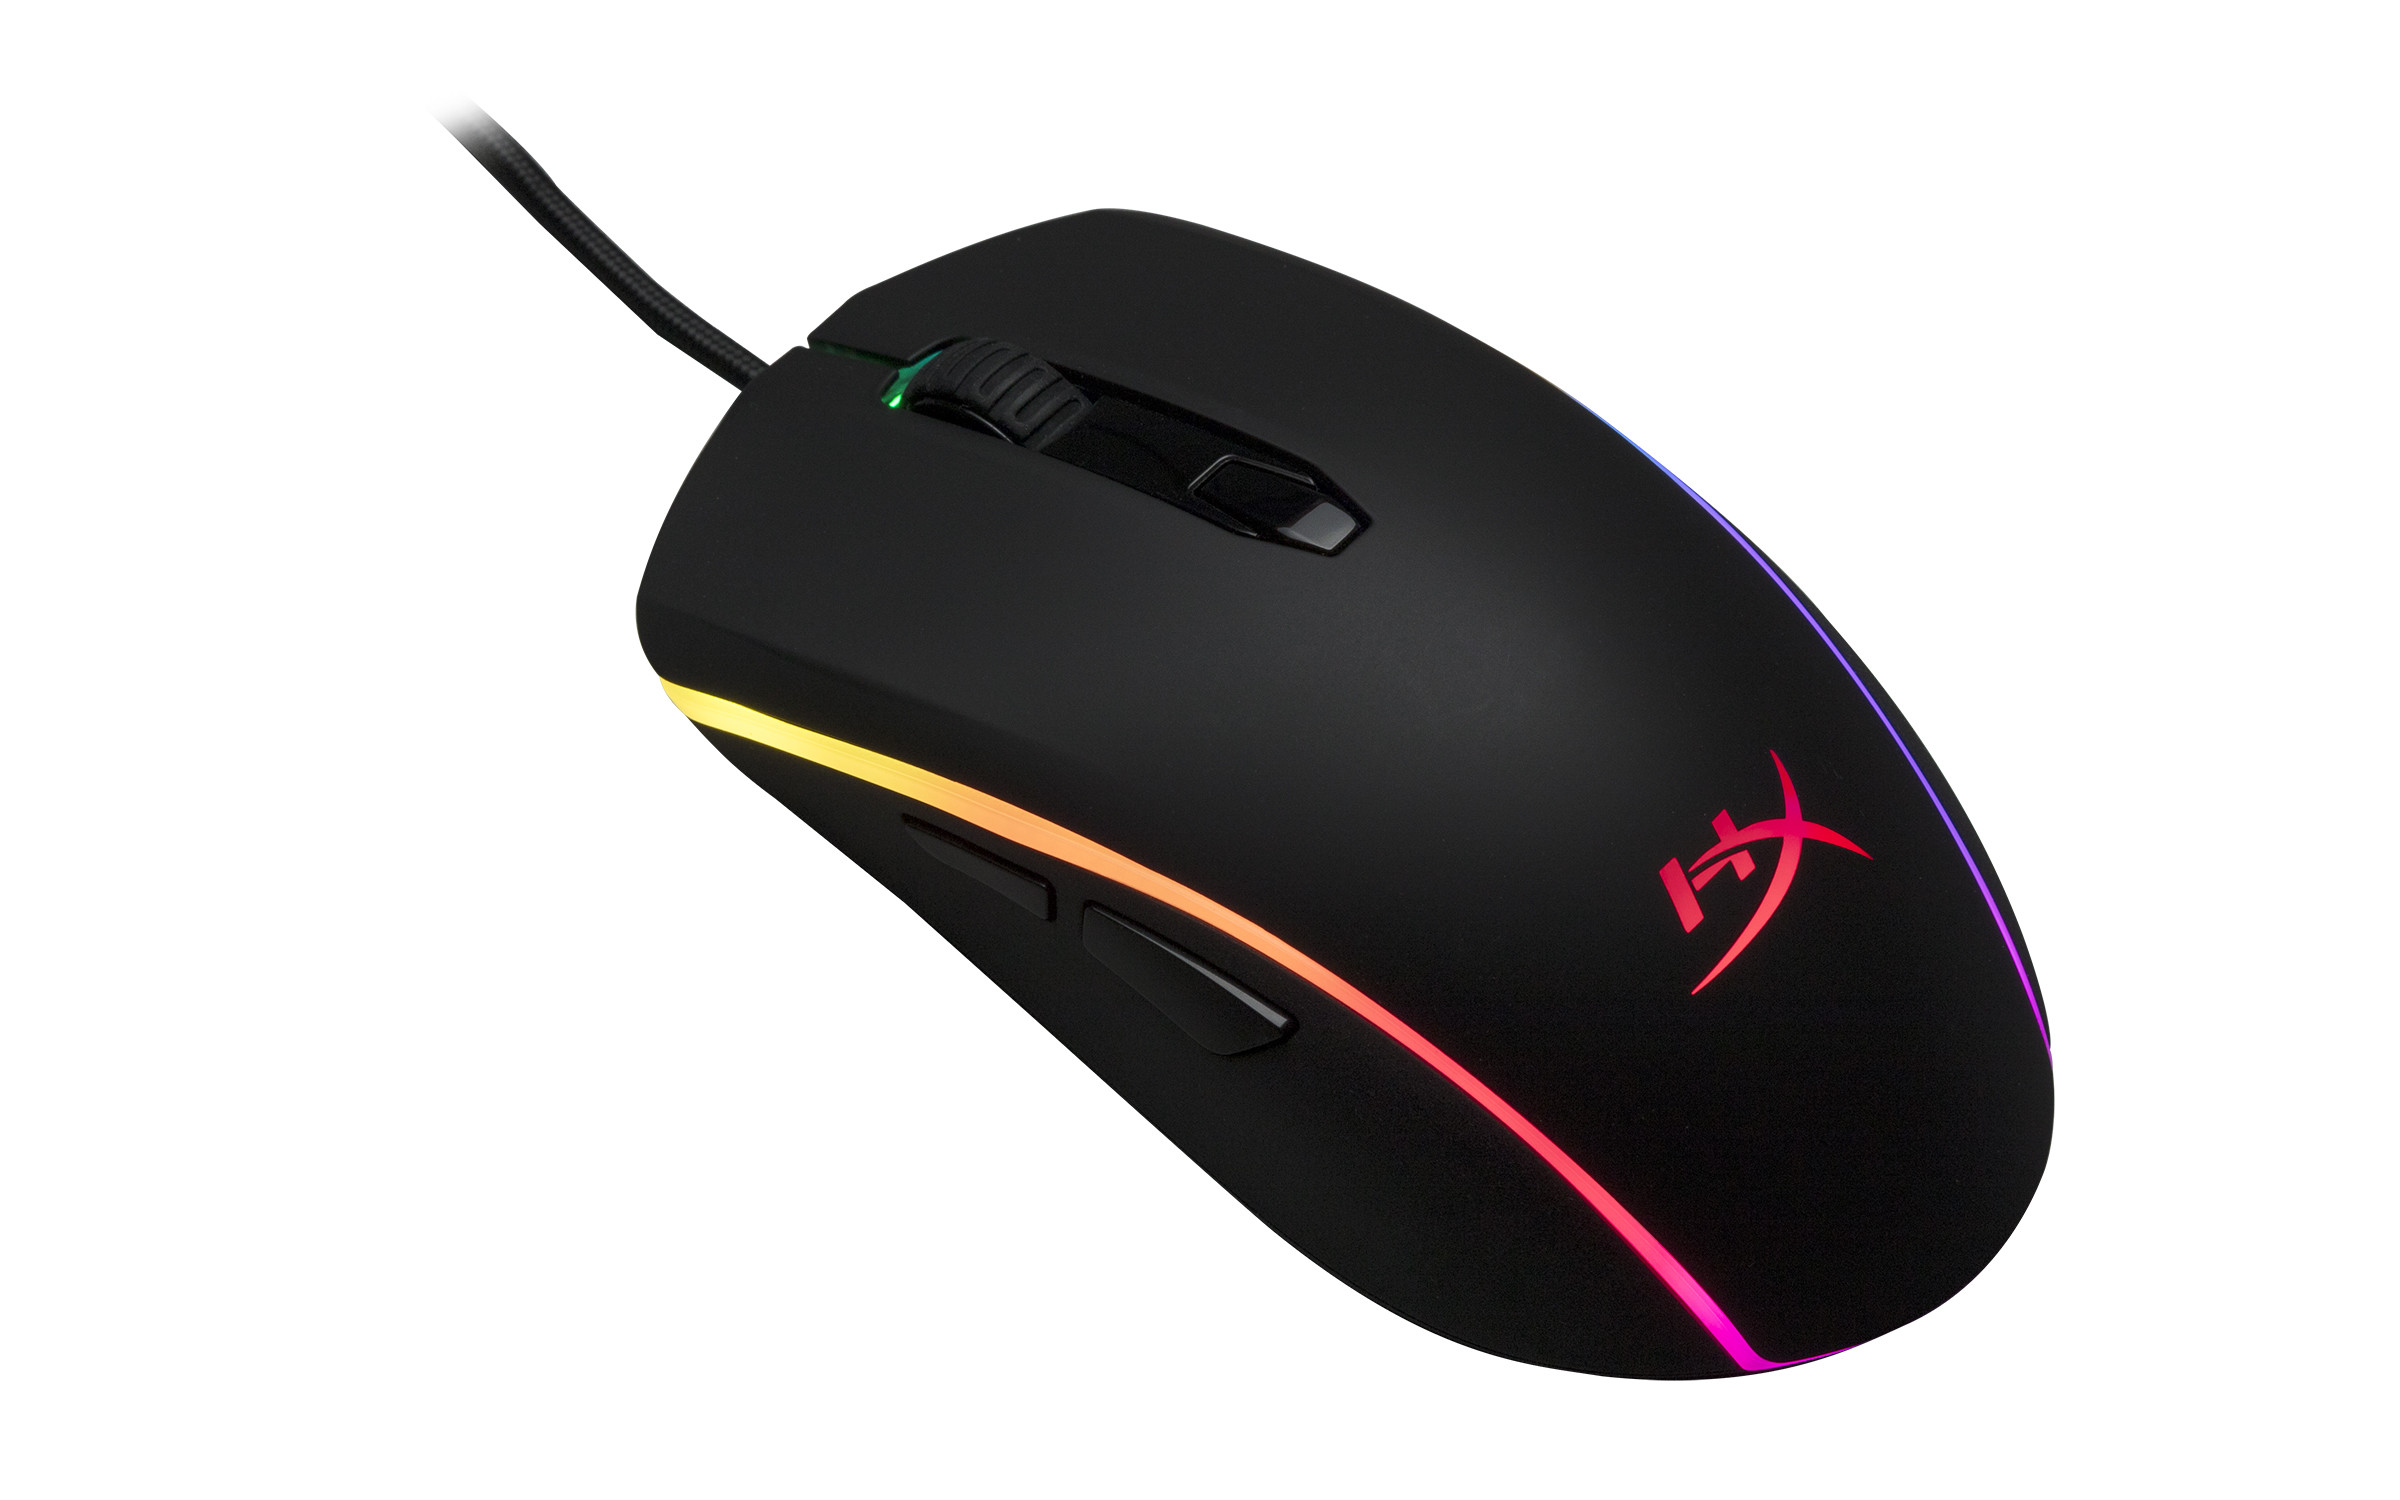 HyperX Pulsefire Surge Gaming Mouse RGB - image 2 of 7